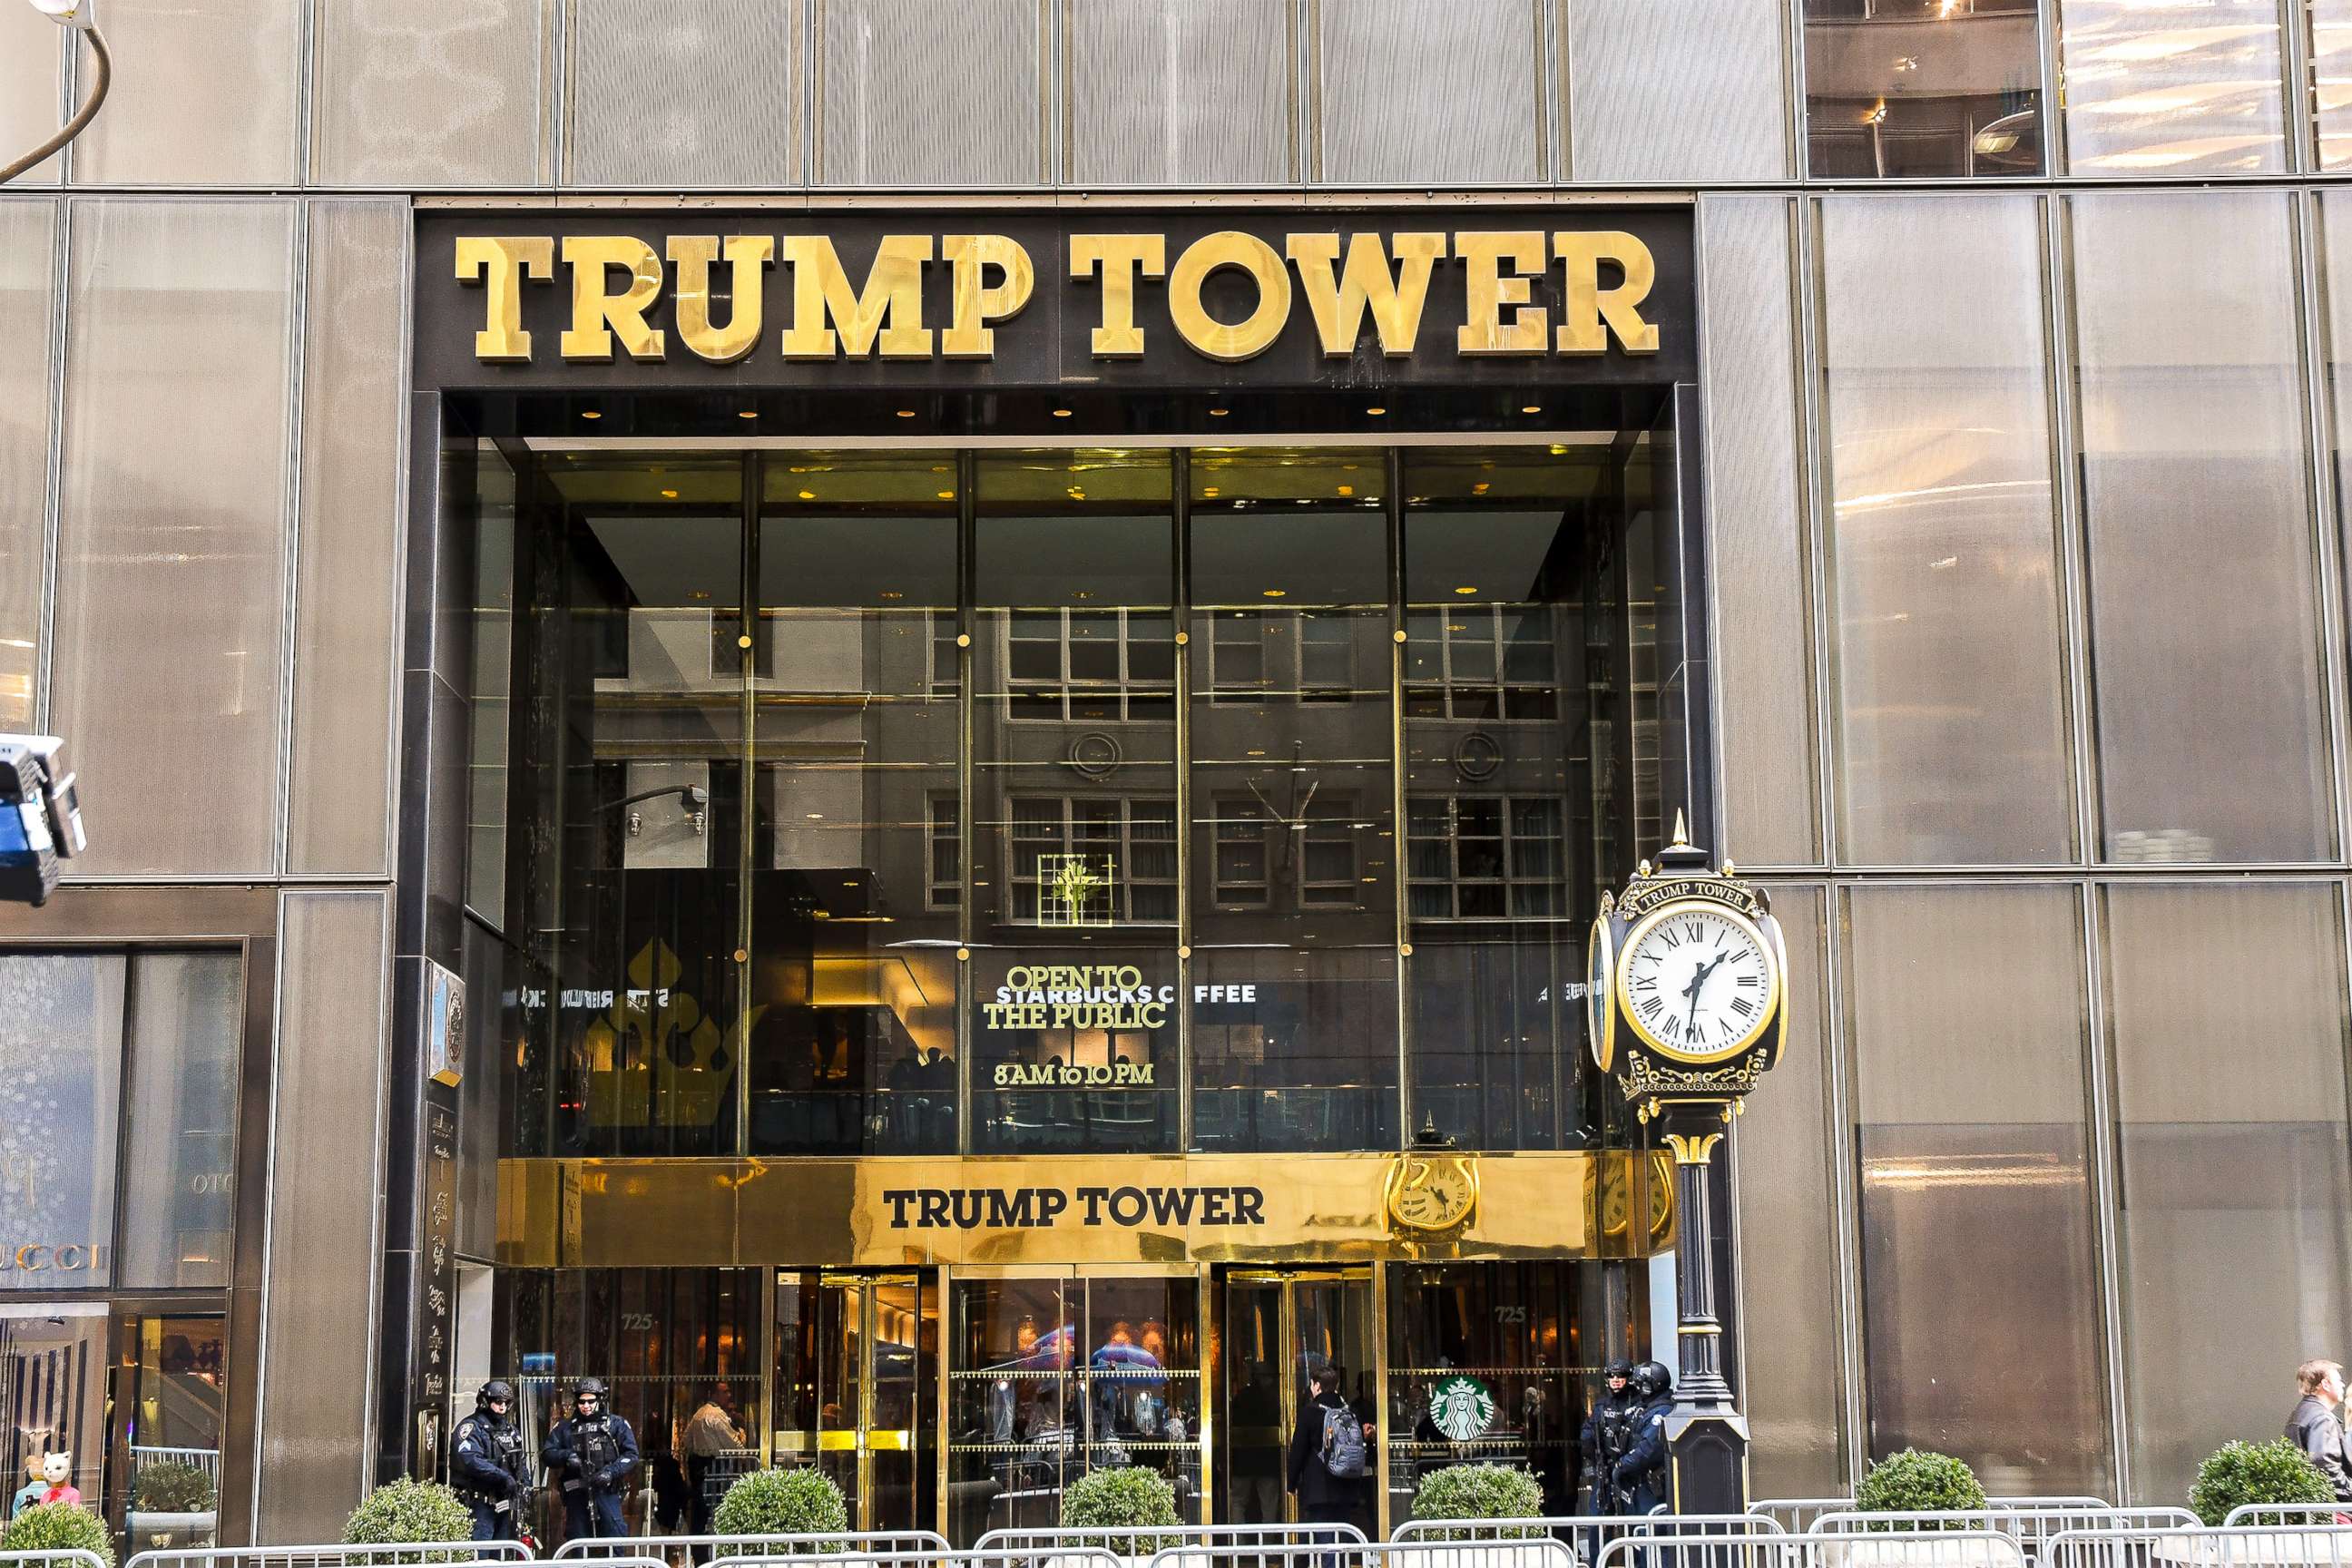 PHOTO: The exterior view of Trump Tower in New York is pictured, Jan. 10, 2017.